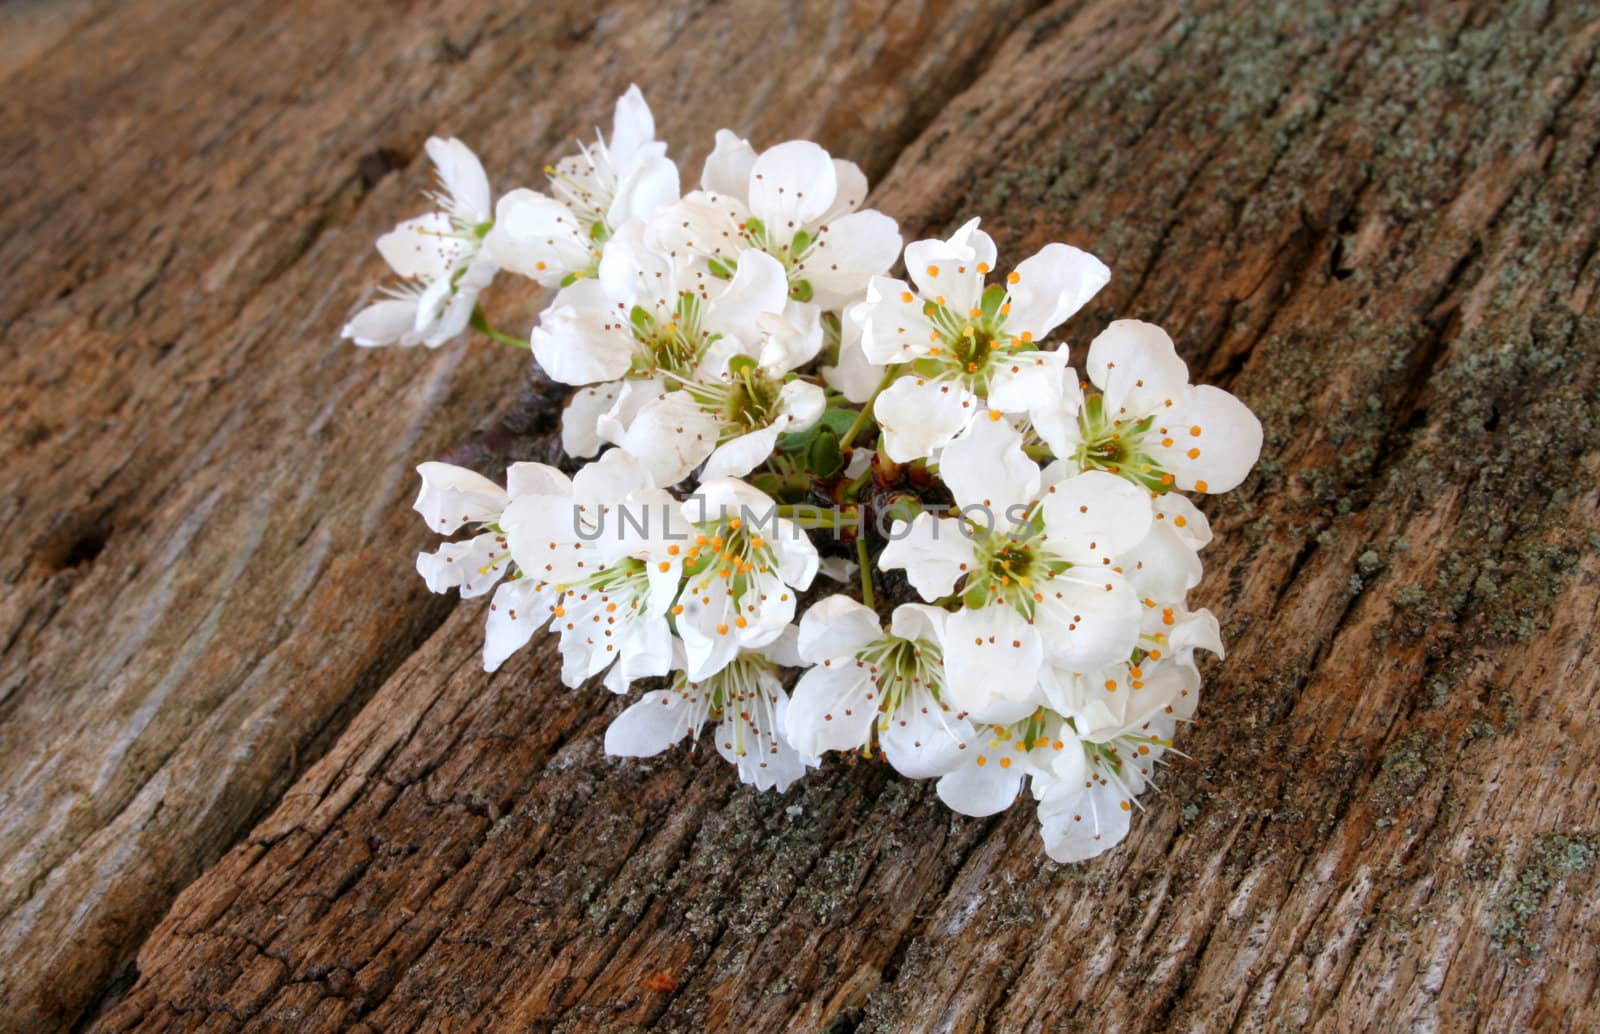 Bradford pear blooms on an old piece of wood for a rustic look.